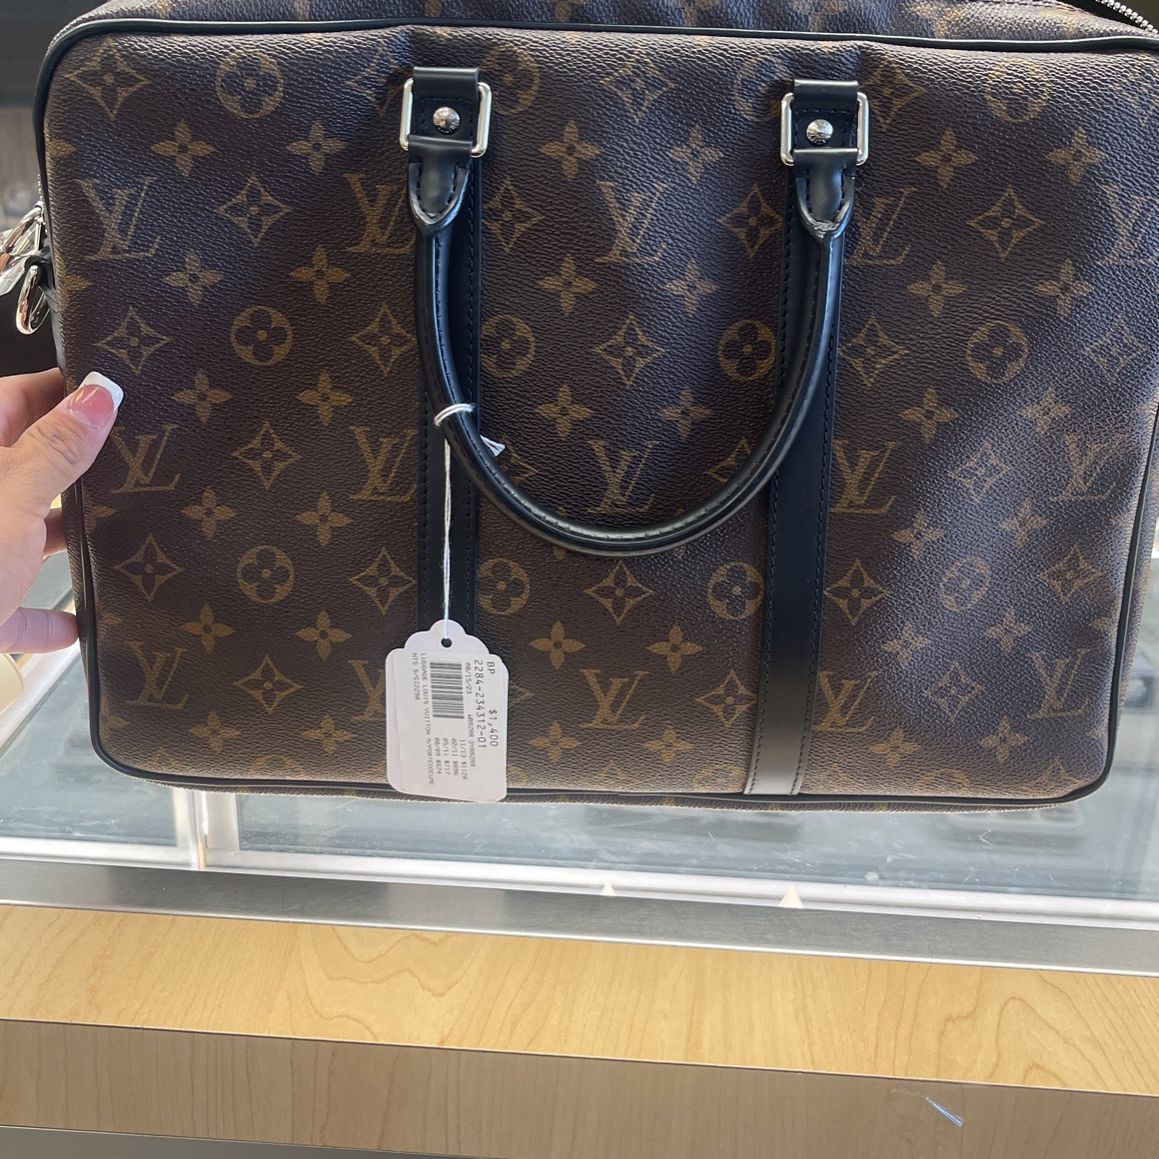 Louis Vuitton Laptop Case For Sale On Layaway 10% Down Ask For Ashley If  Interested Thank You for Sale in Houston, TX - OfferUp